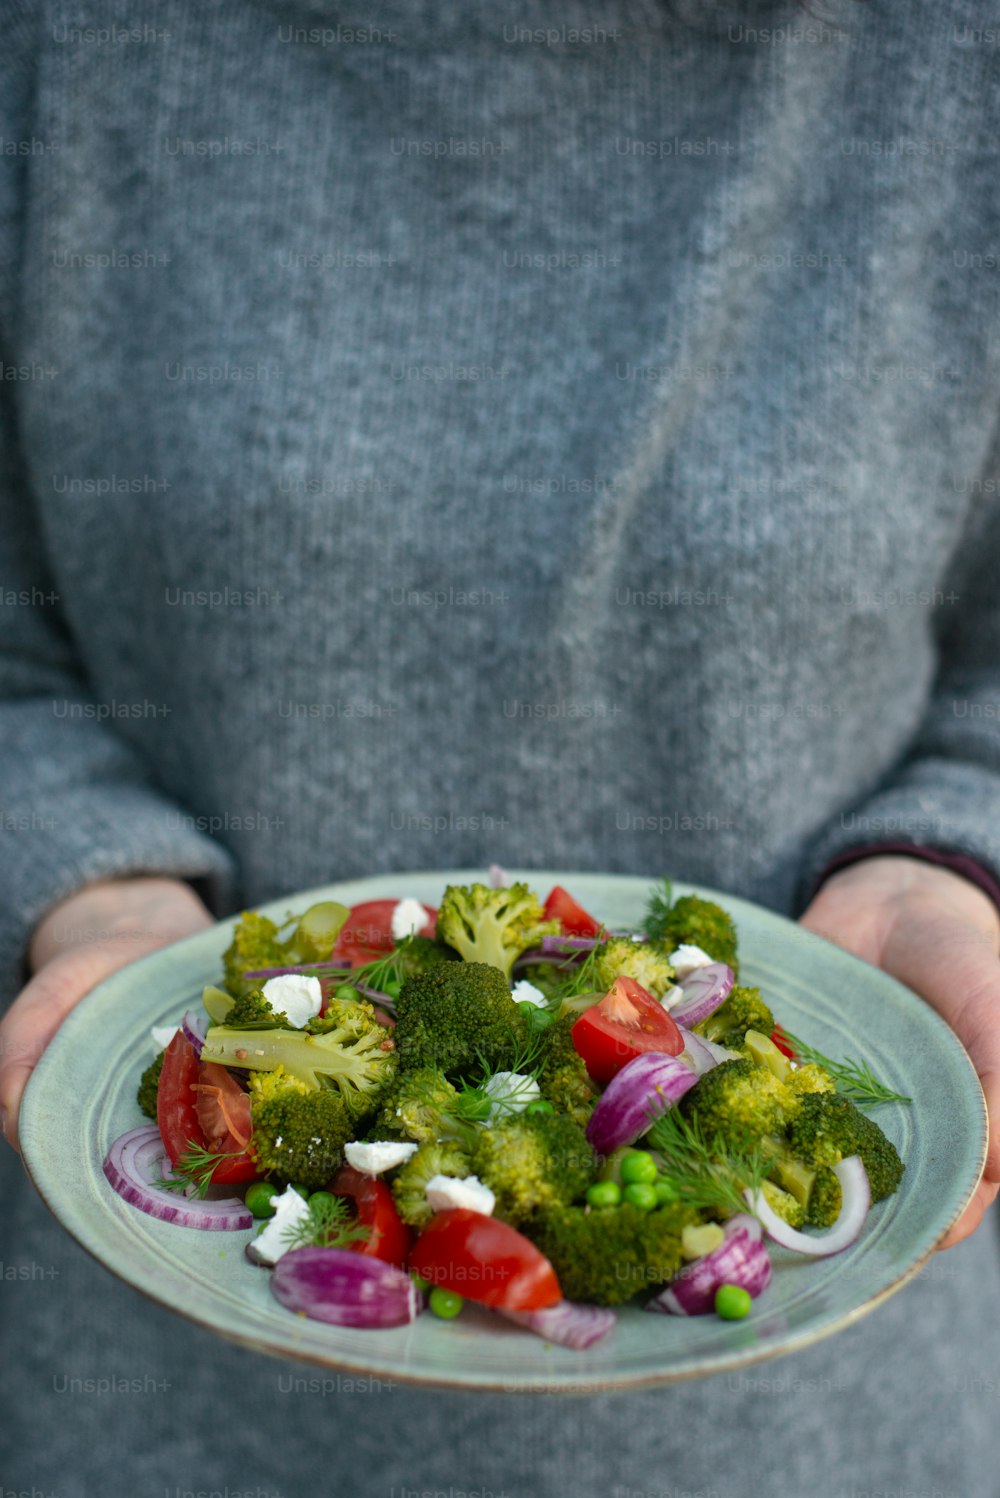 a person holding a plate of broccoli and tomatoes